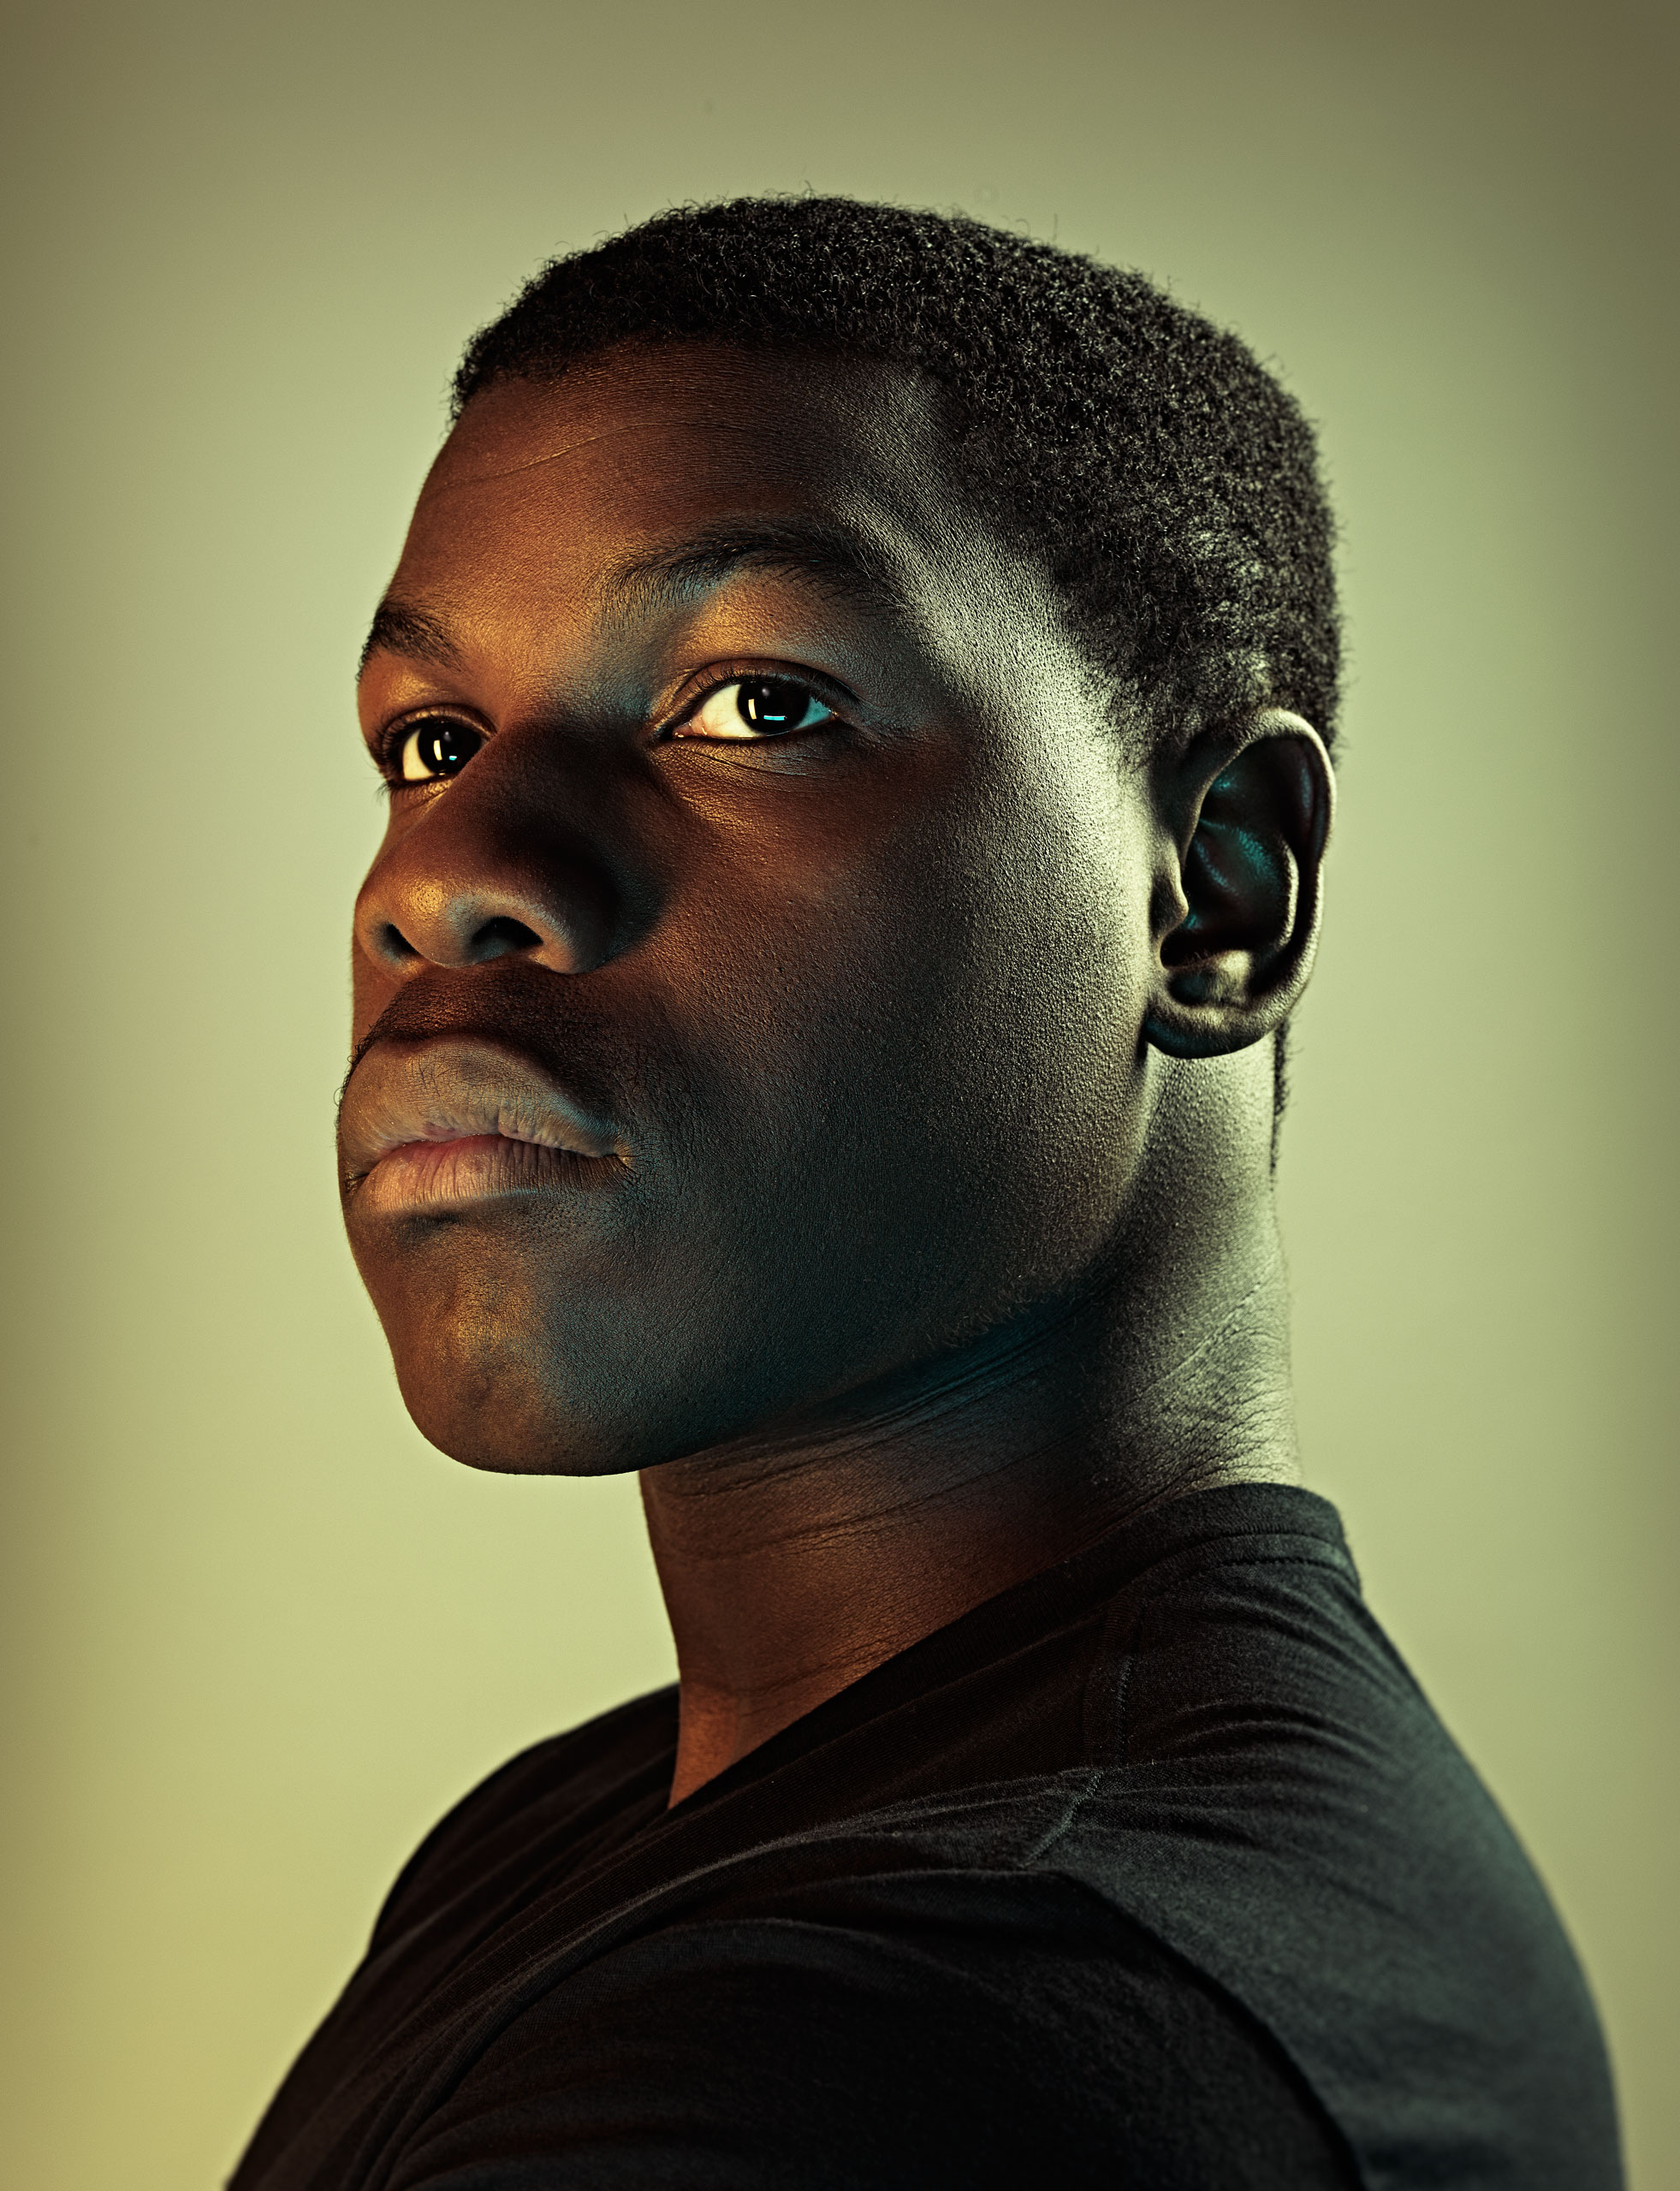 John Boyega photographed for Time on October 26, 2015 in Los Angeles